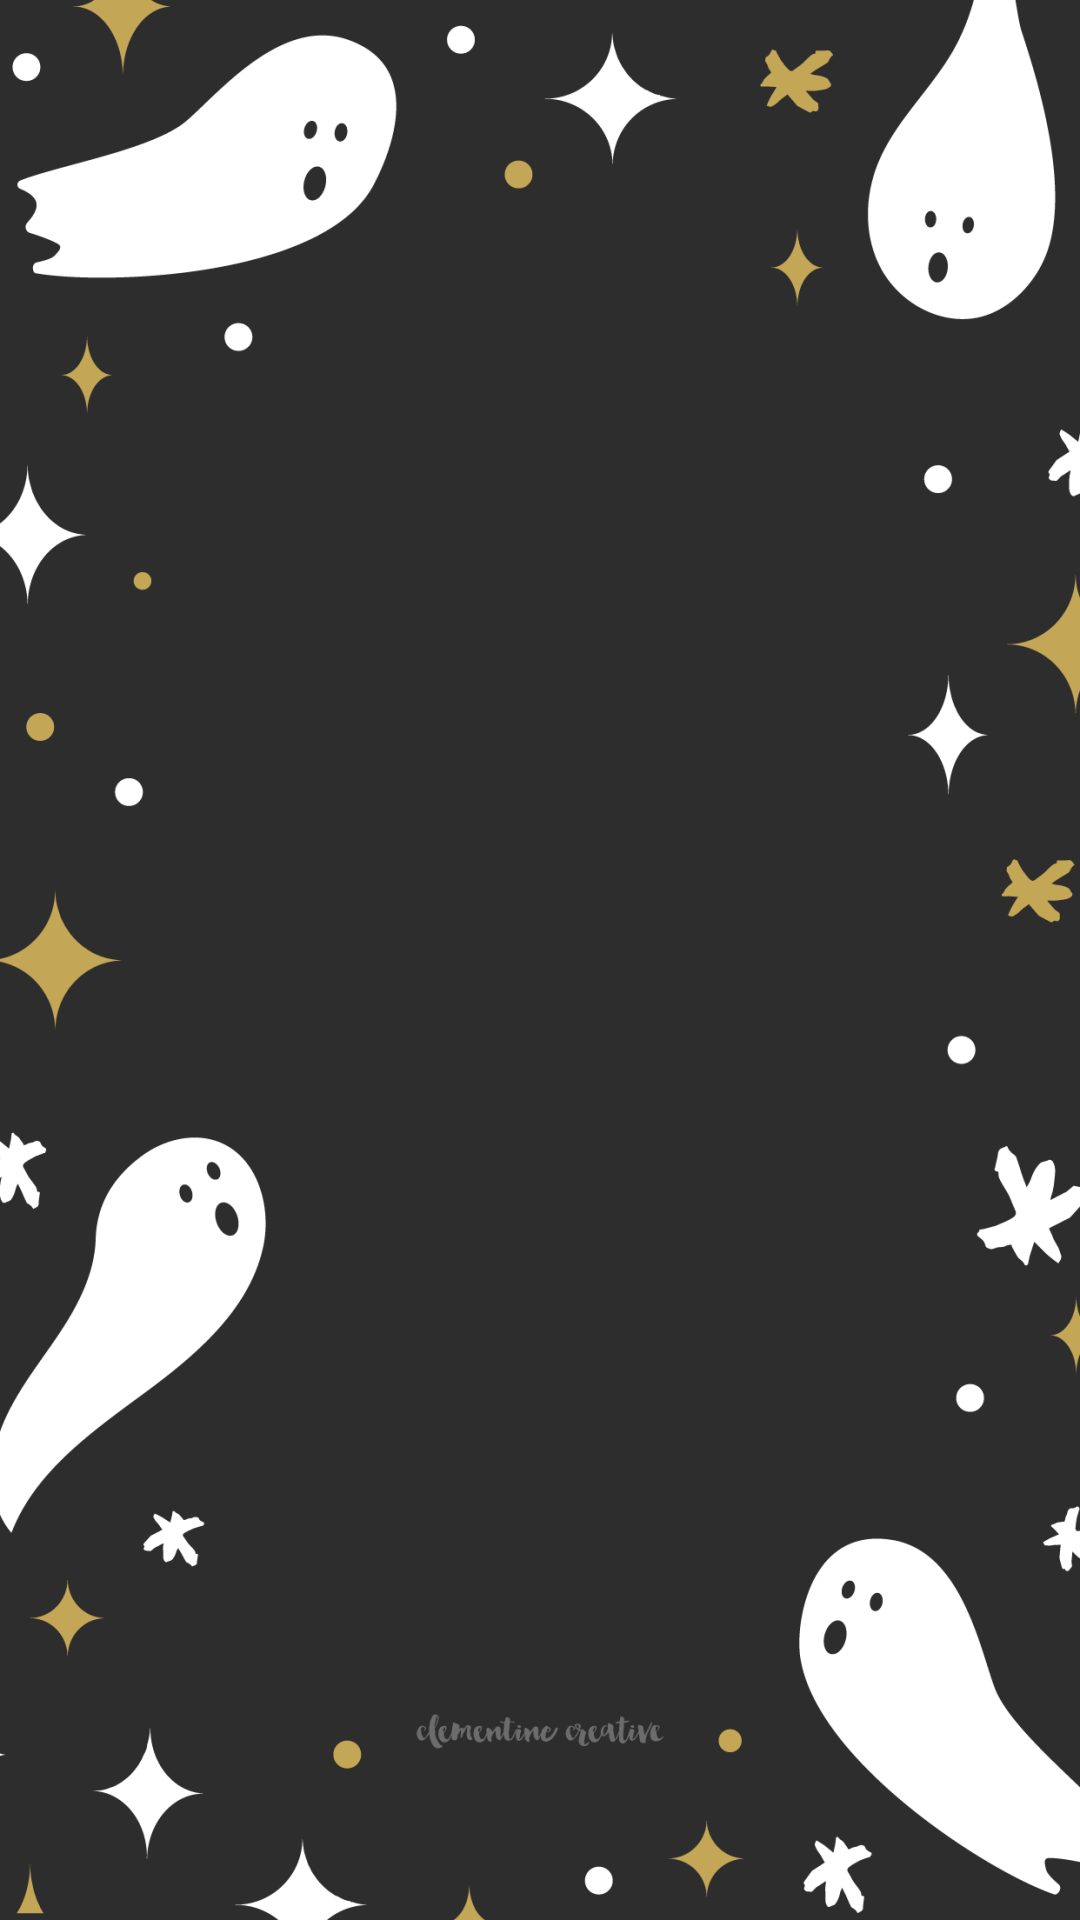  Cute  Wallpapers   Cute  ghost  wallpaper  I found on 